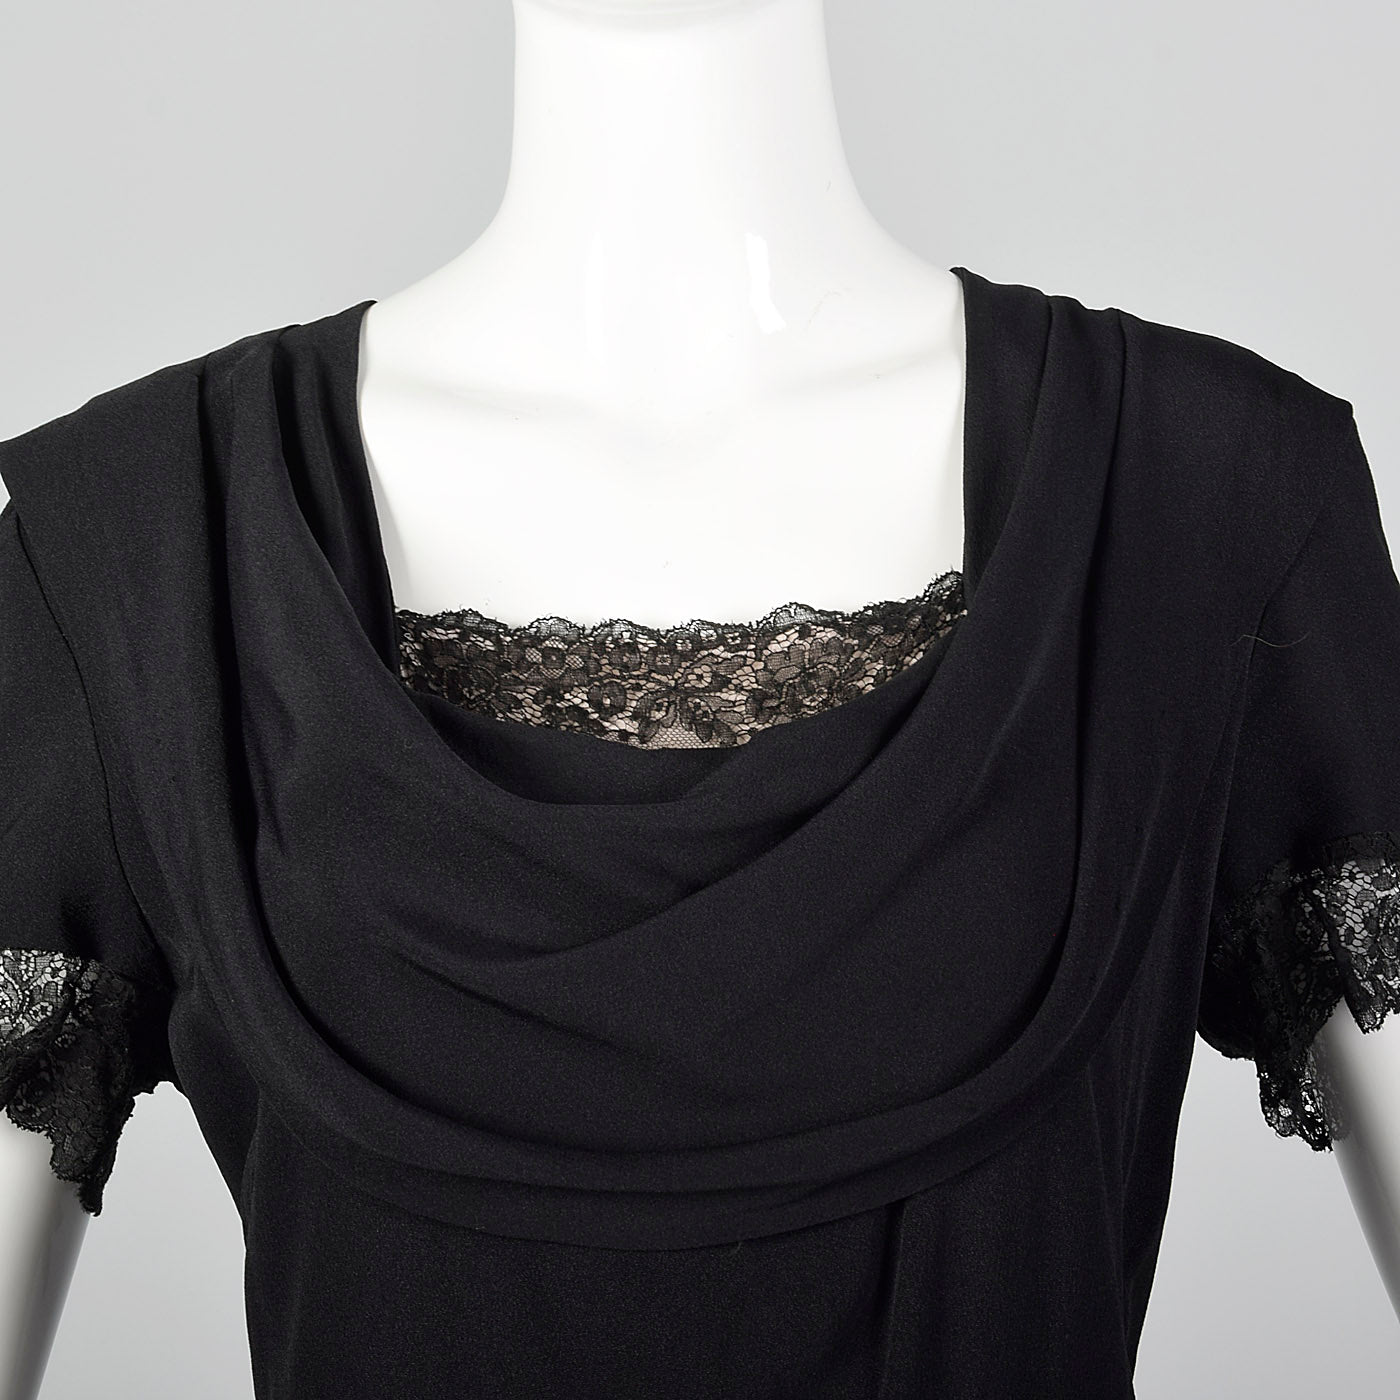 1940s Black Peplum Dress with Lace Collar and Cuffs